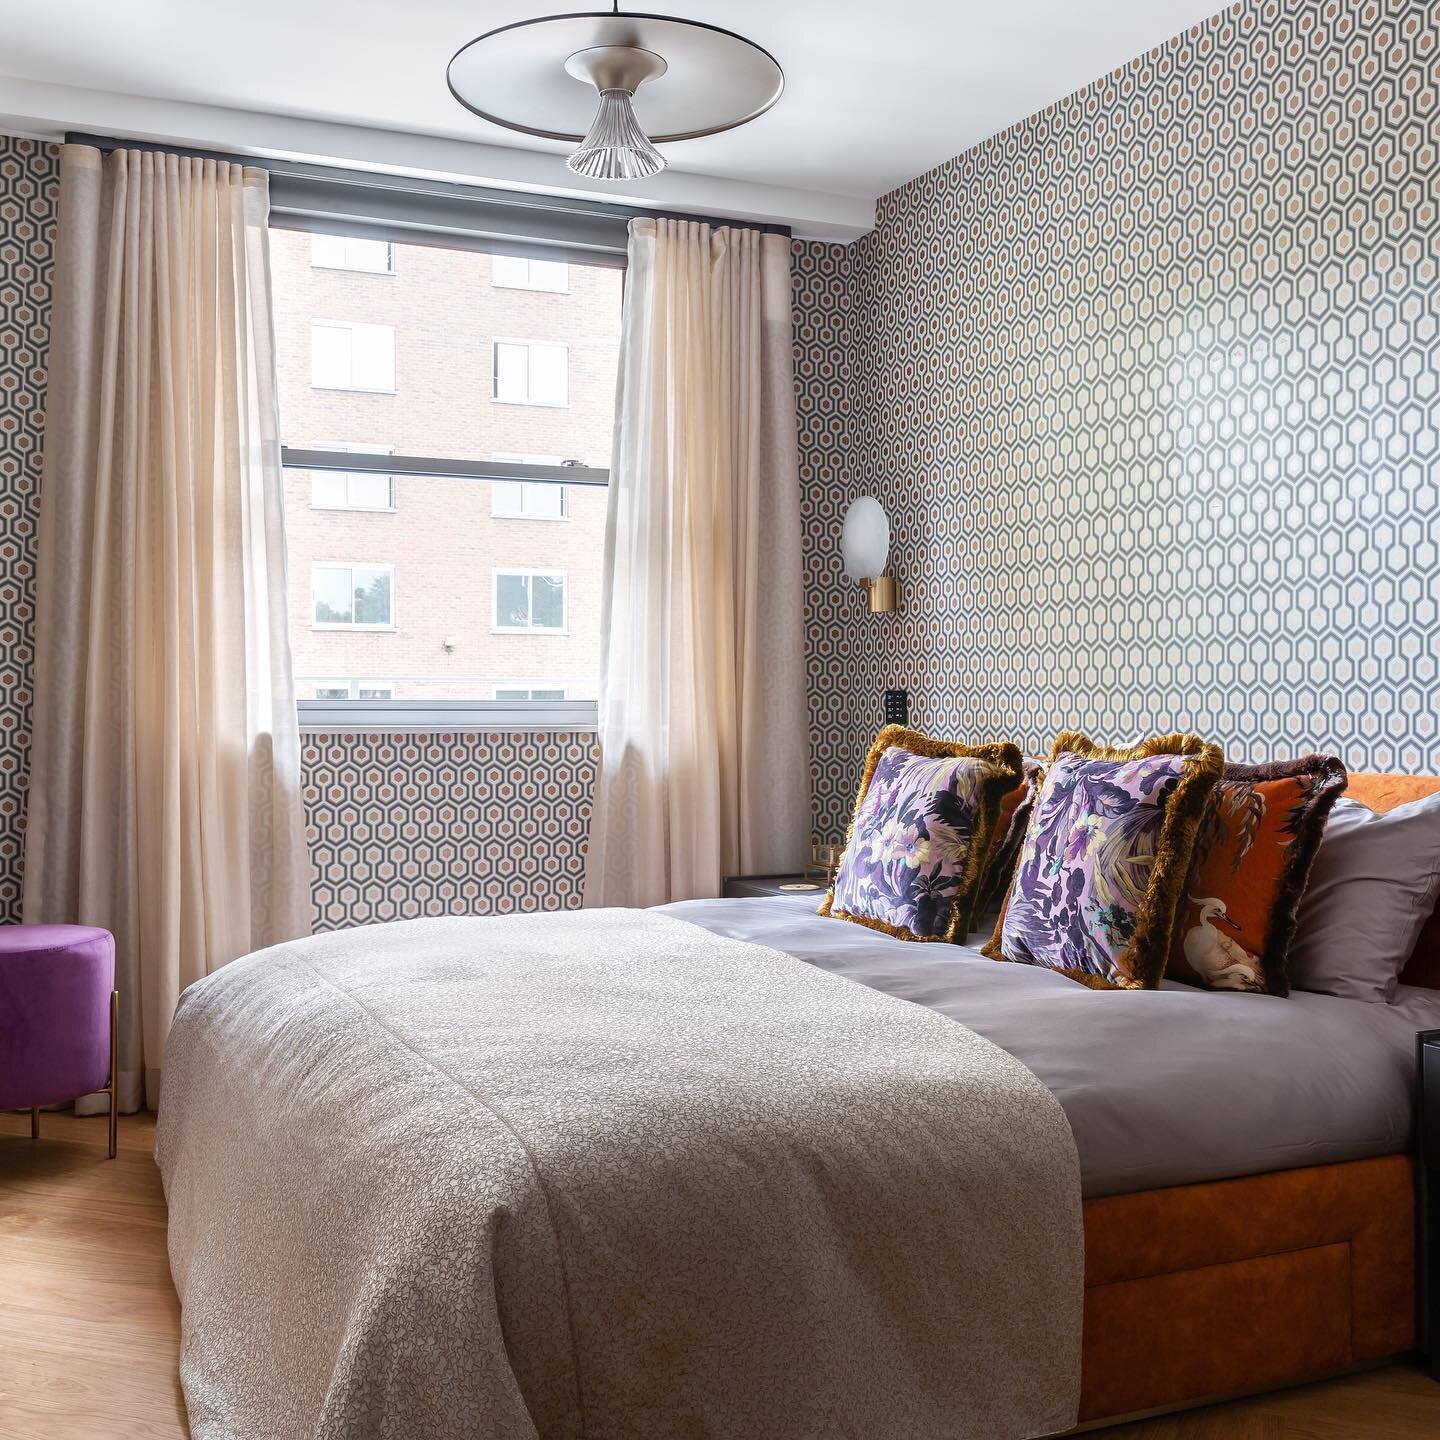 Recently completed site by @interworldfurnishings - This bedroom designed by @kirangala_and_associates spells luxury all over with its orange bed &amp; purple poof set against the backdrop of the geometric patterned wallpaper. 
Photo @uliana.grishina